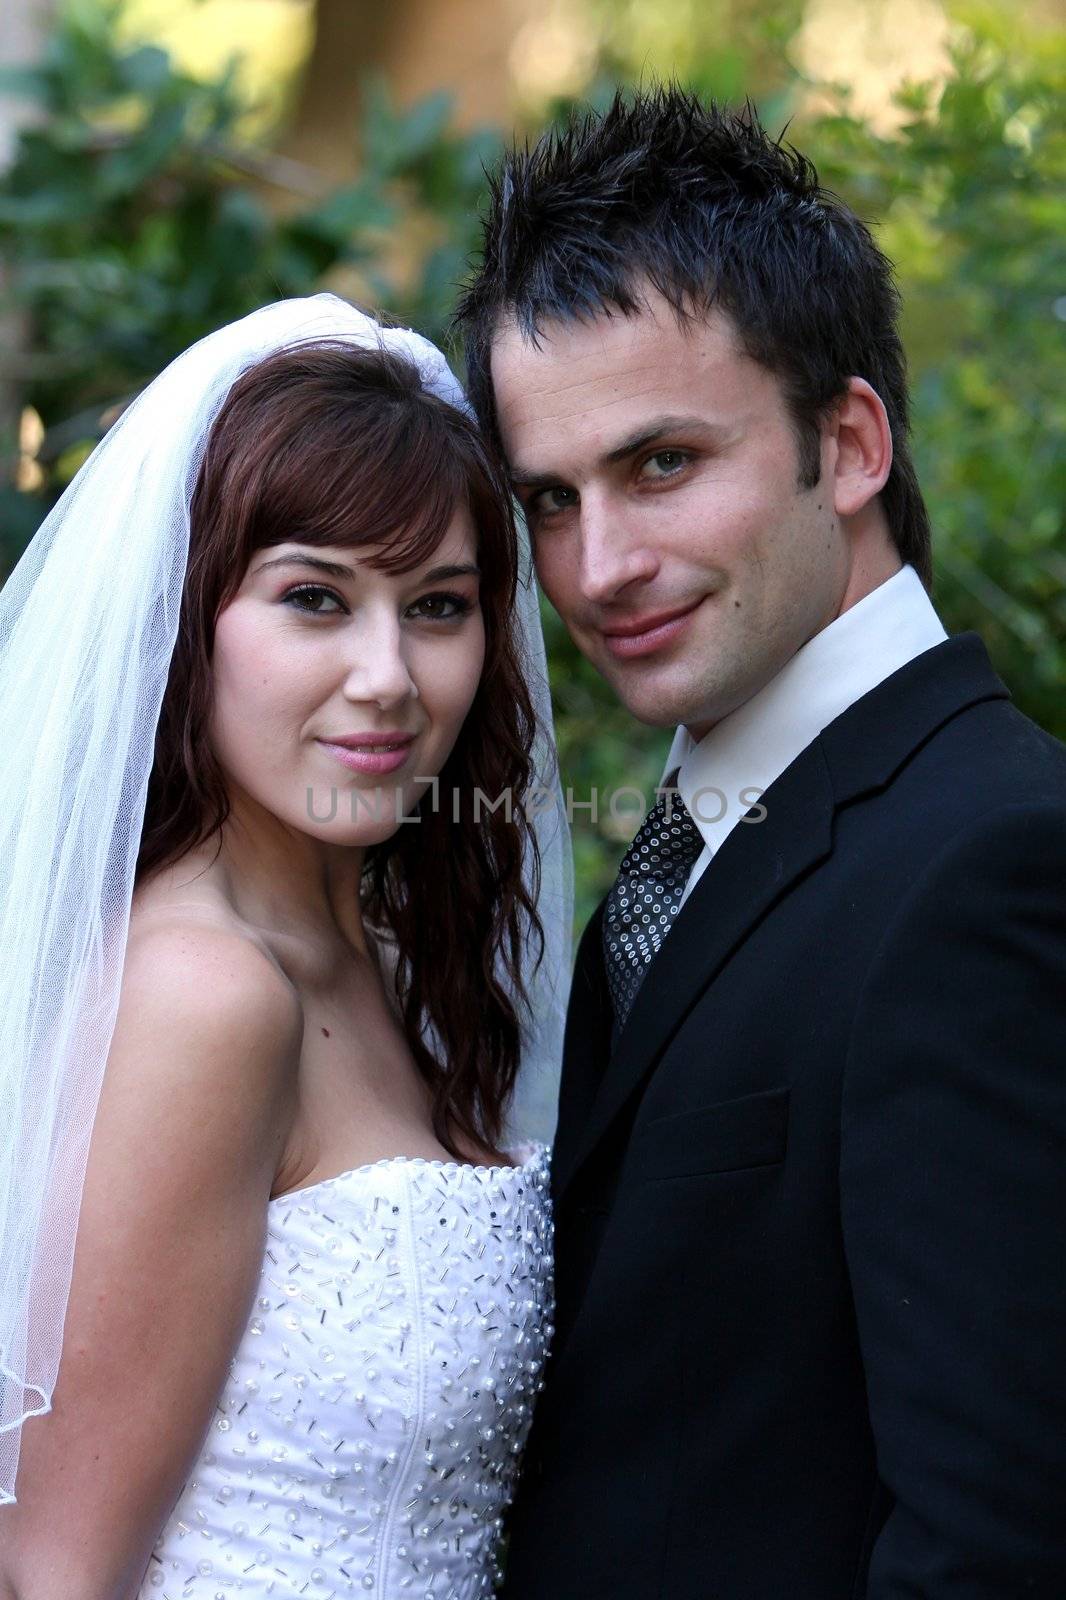 Attractive looking young couple on their wedding day